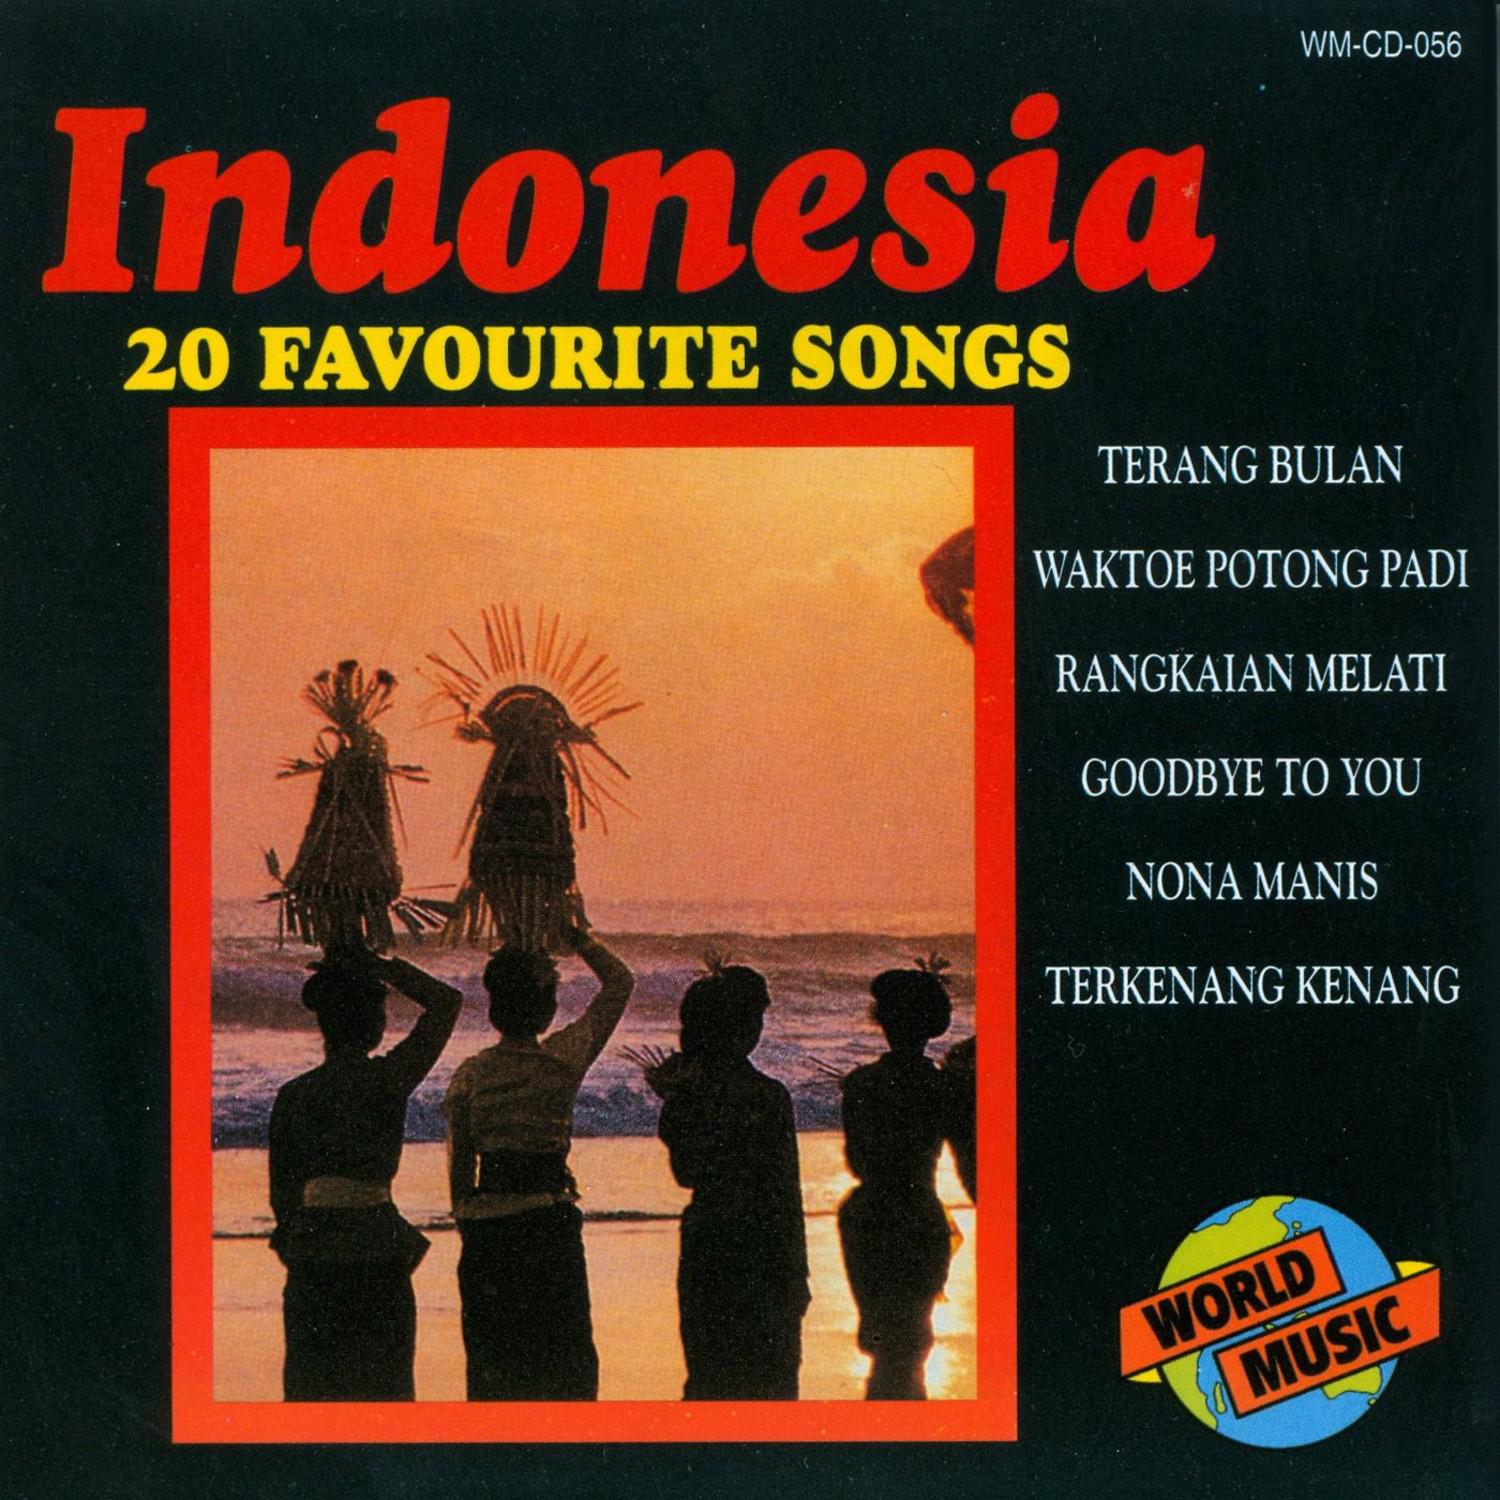 Indonesia - 20 Favourite Songs